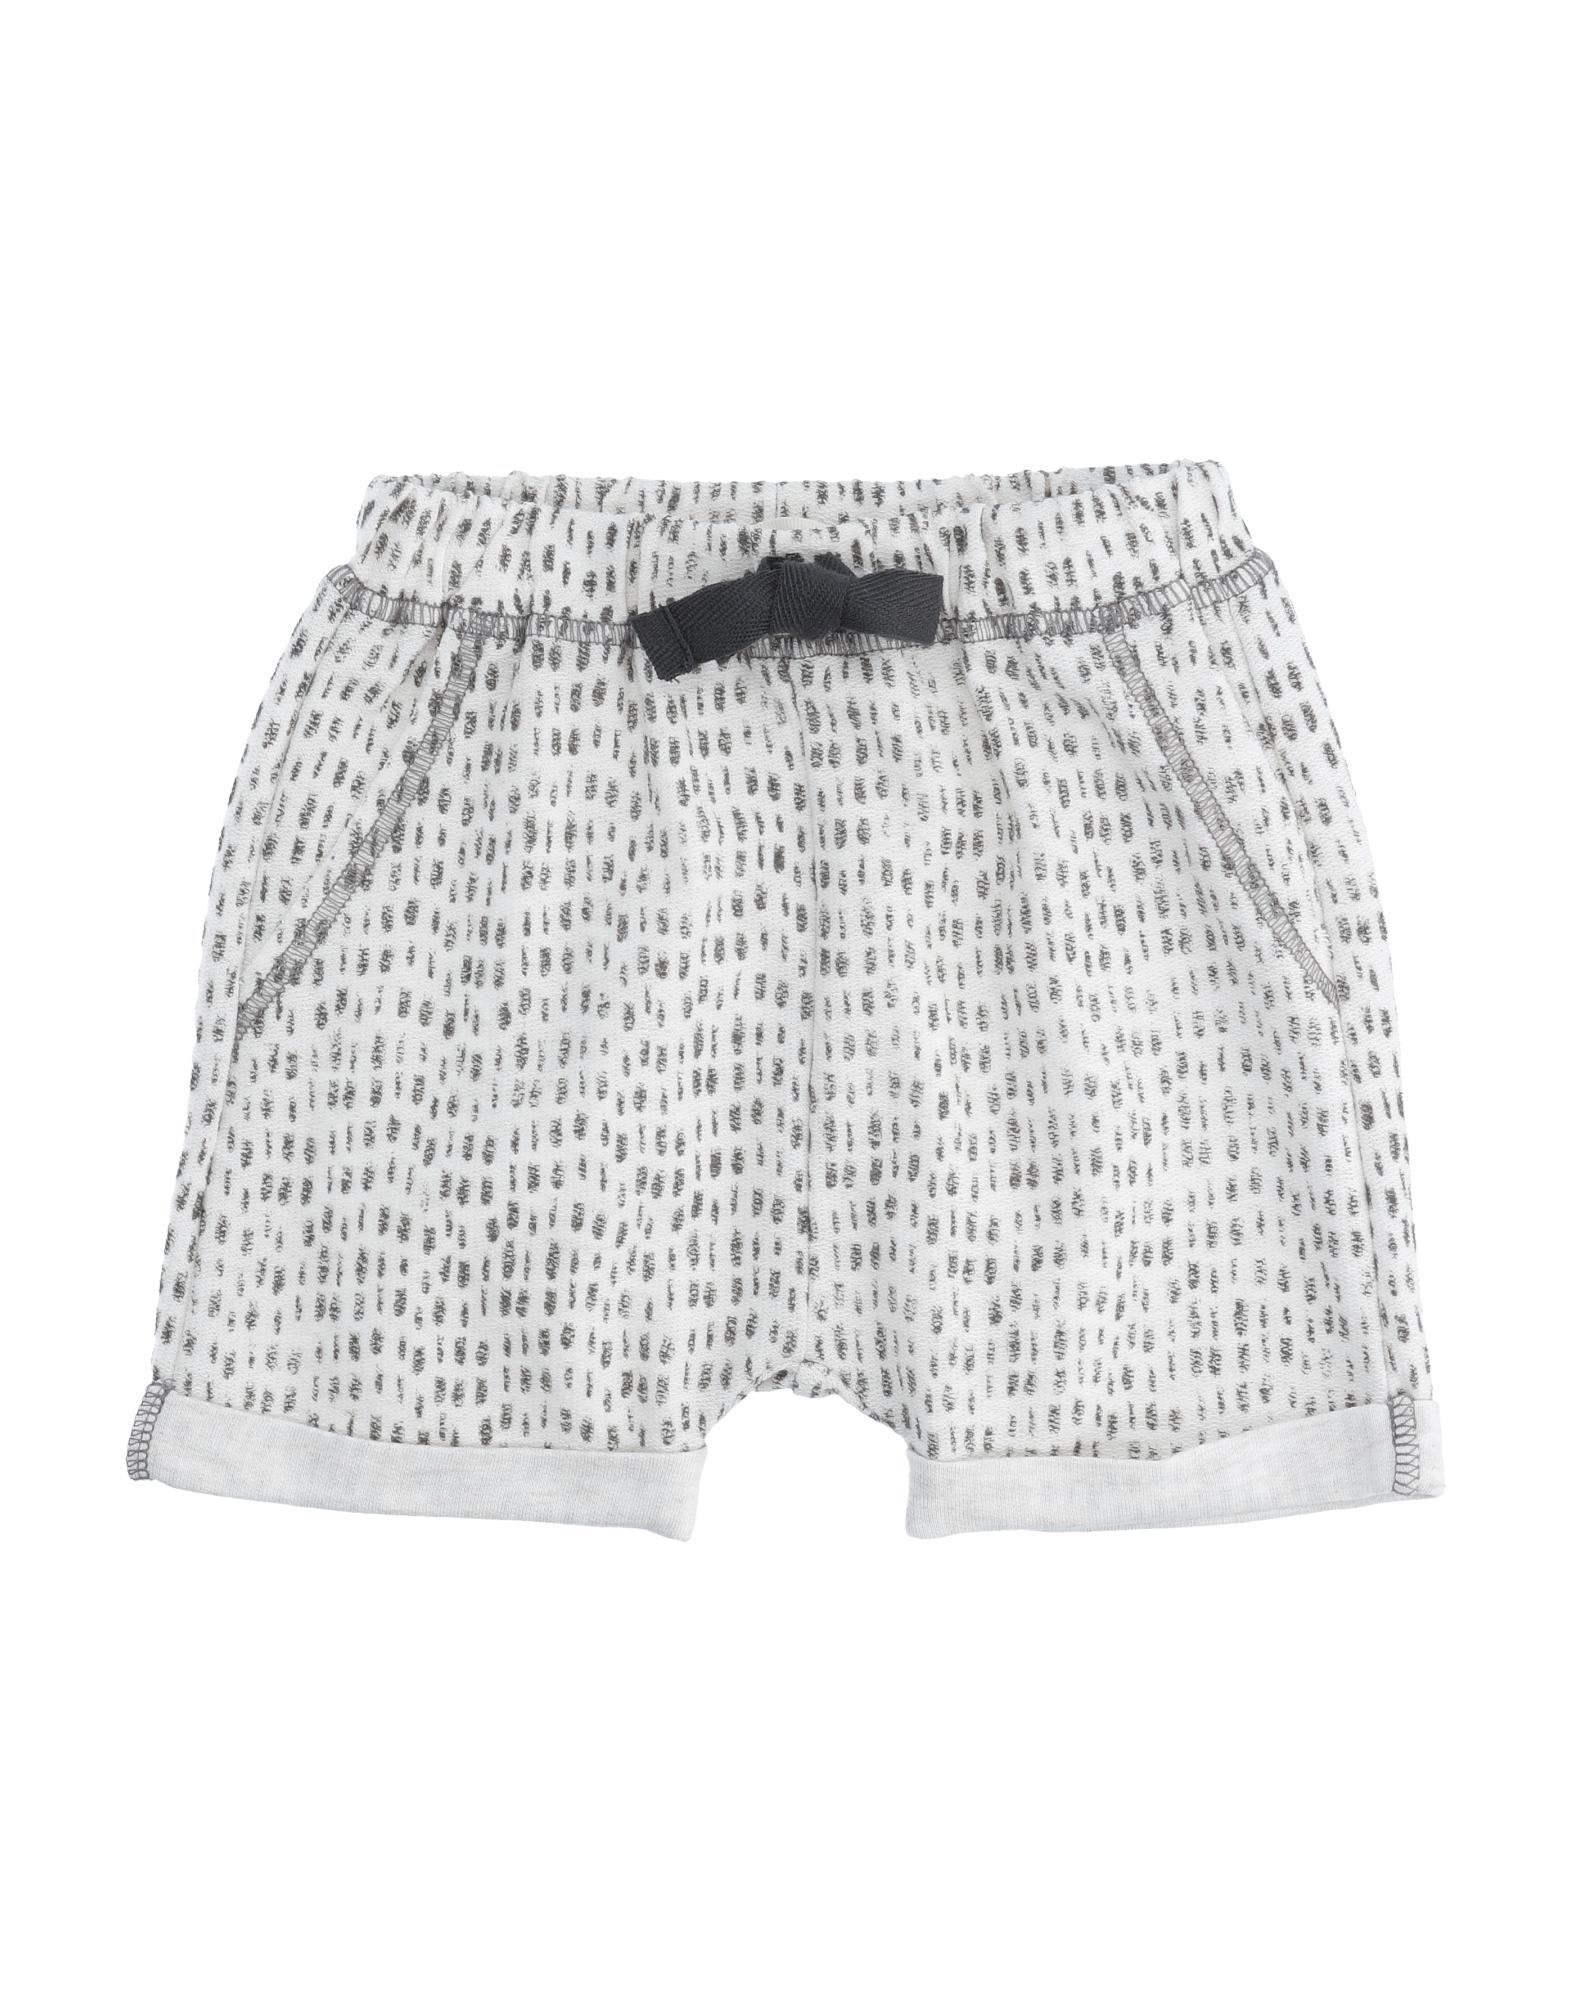 MESSAGE IN THE BOTTLE Shorts & Bermudashorts Kinder Elfenbein von MESSAGE IN THE BOTTLE